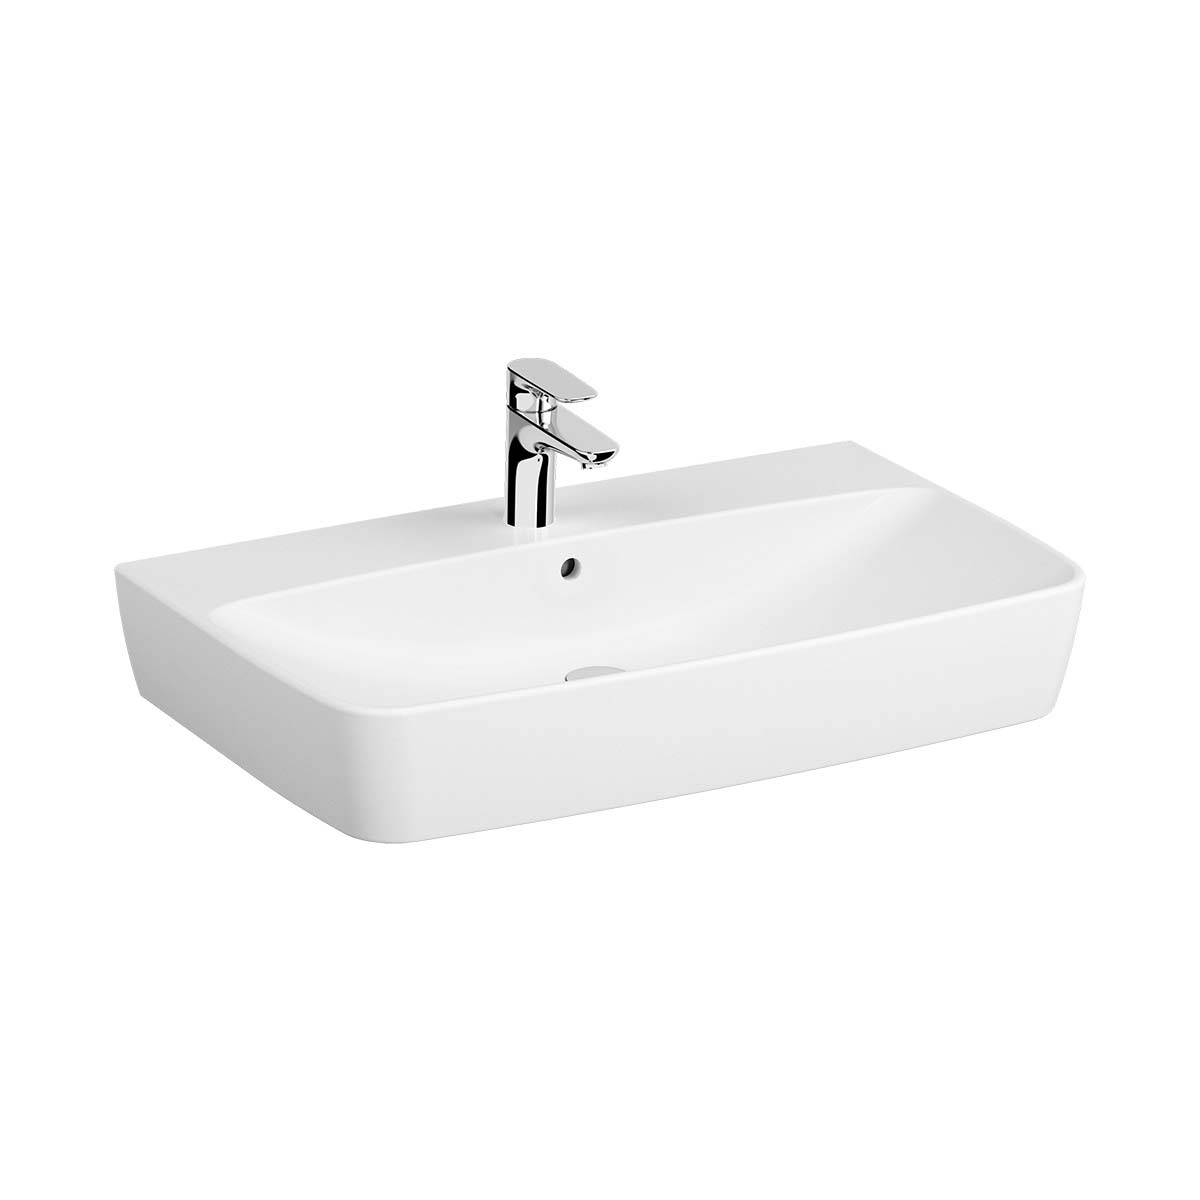 Washbasin, 80 cm, One Tap Hole, With Overflow Hole, For Countertop Use